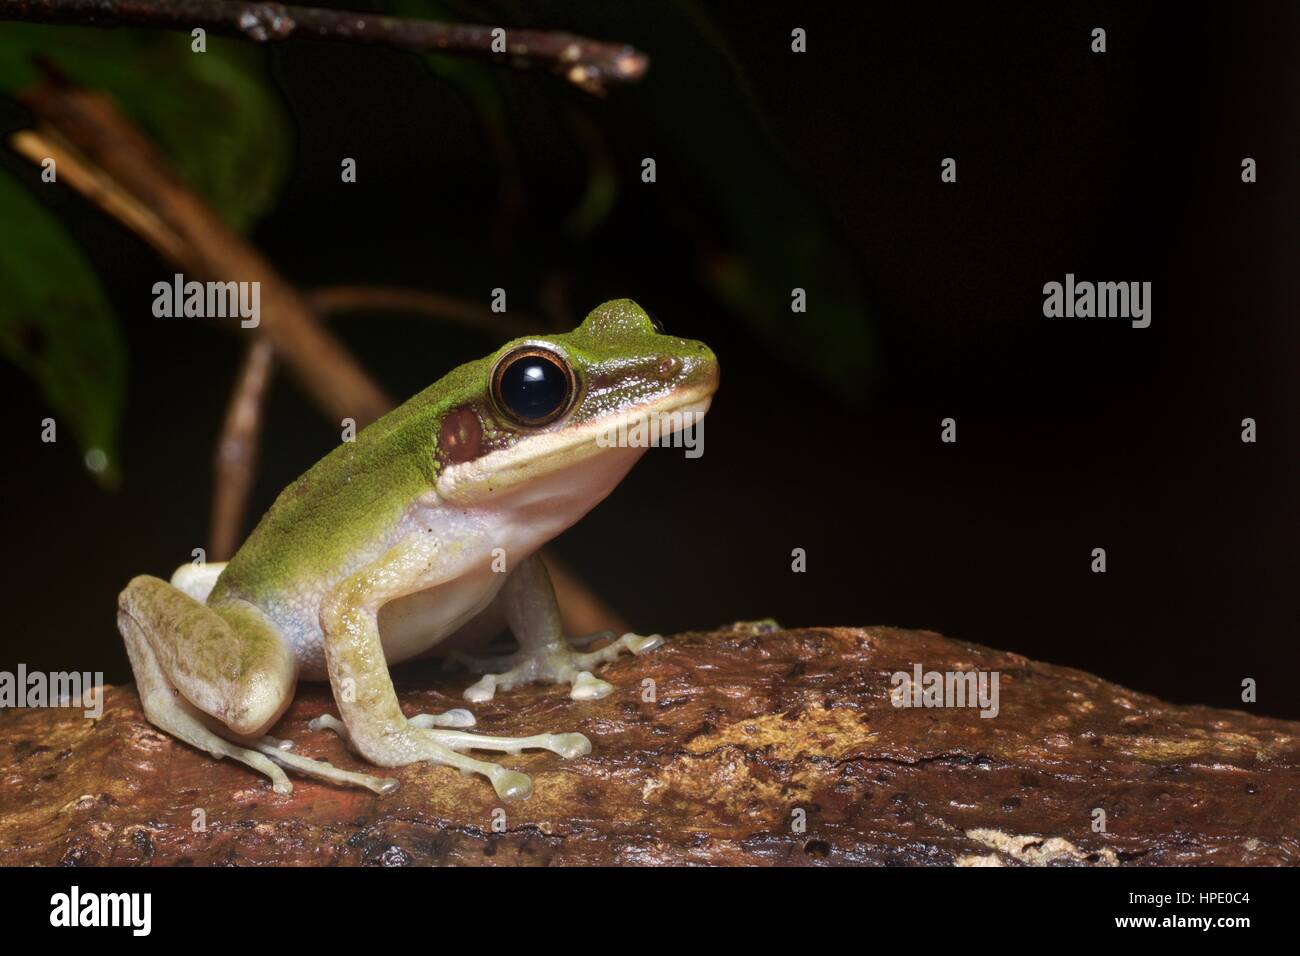 A White-lipped Frog (Chalcorana labialis) on a boulder in the rainforest in Santubong National Park, Sarawak, East Malaysia, Borneo Stock Photo